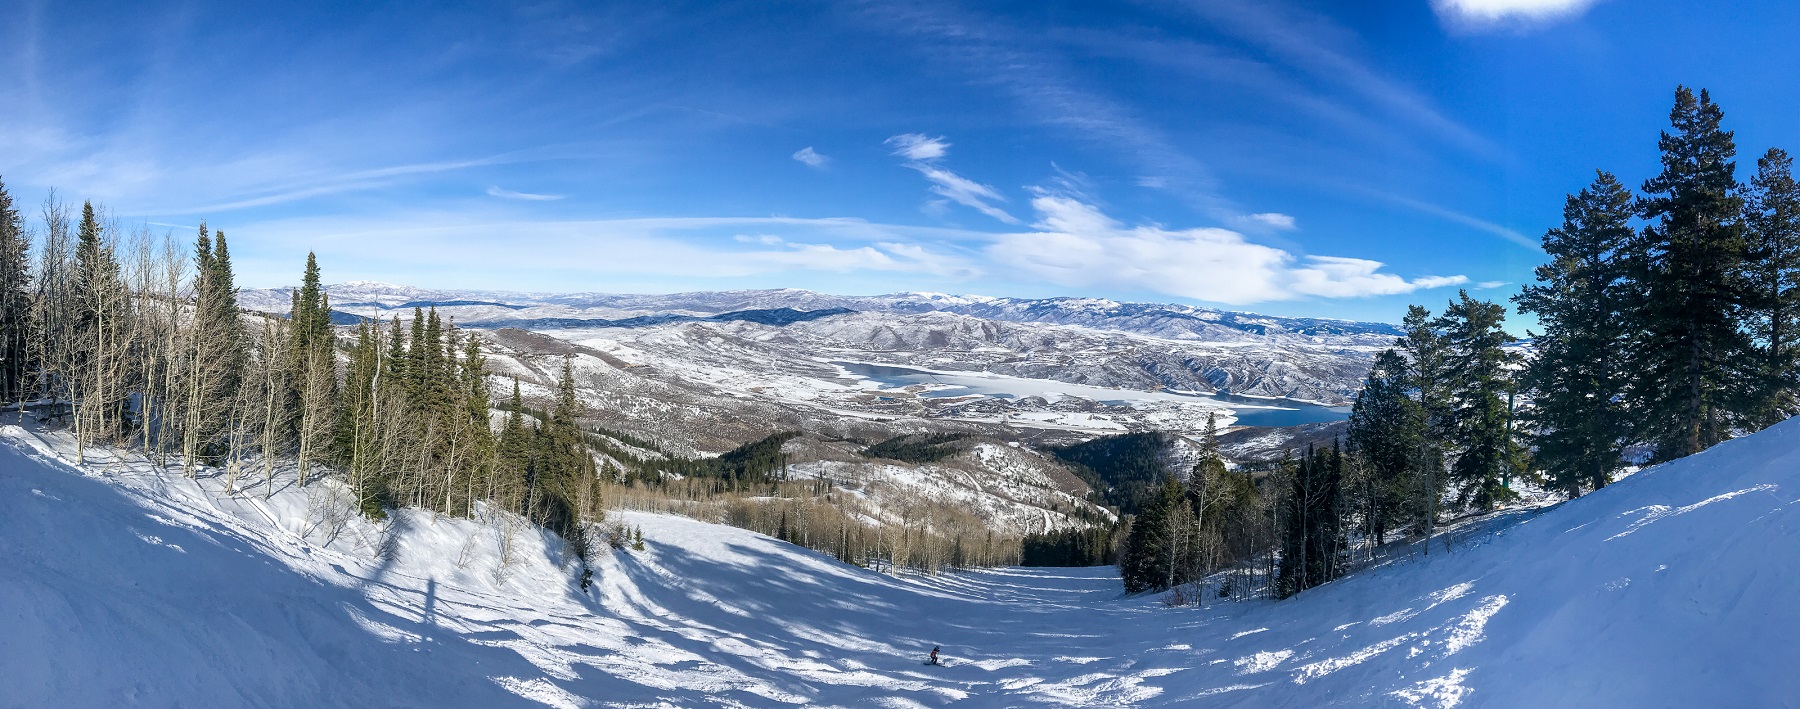 Panoramic view of Wasatch mountains. Deer Valley resort.